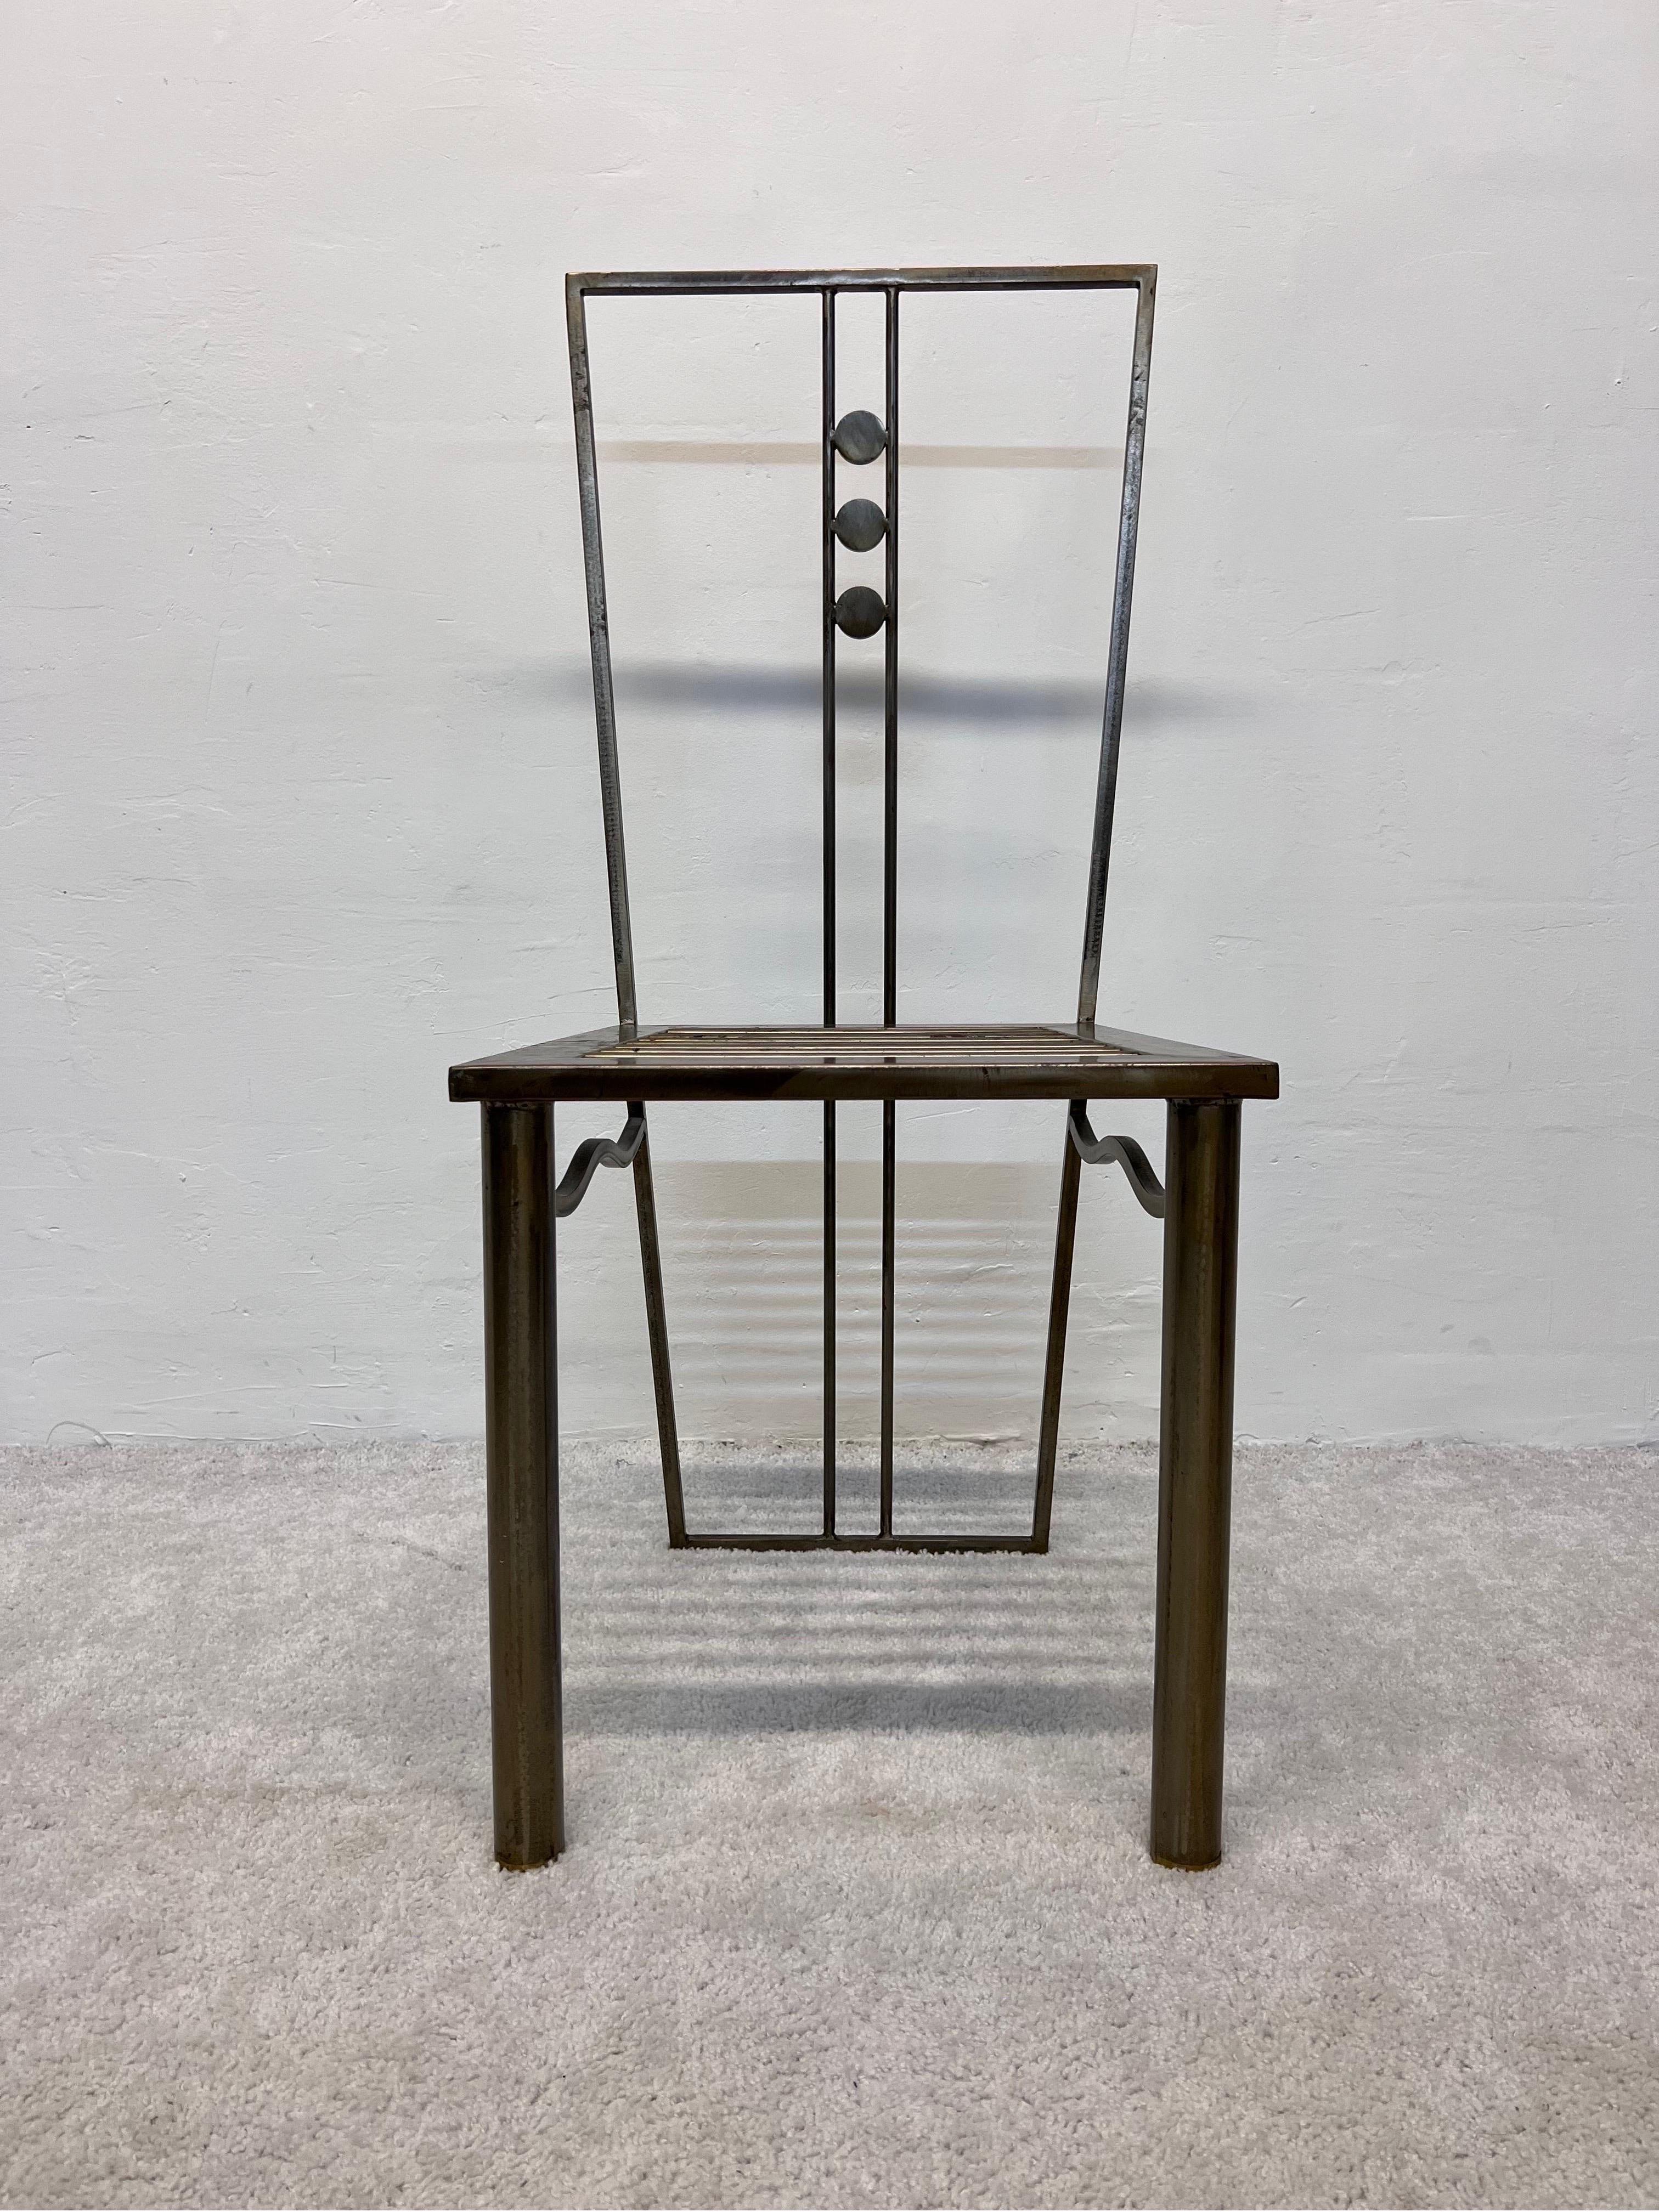 Postmodern Sculptural Studio Crafted Steel Dining or Side Chair, 1990s For Sale 5